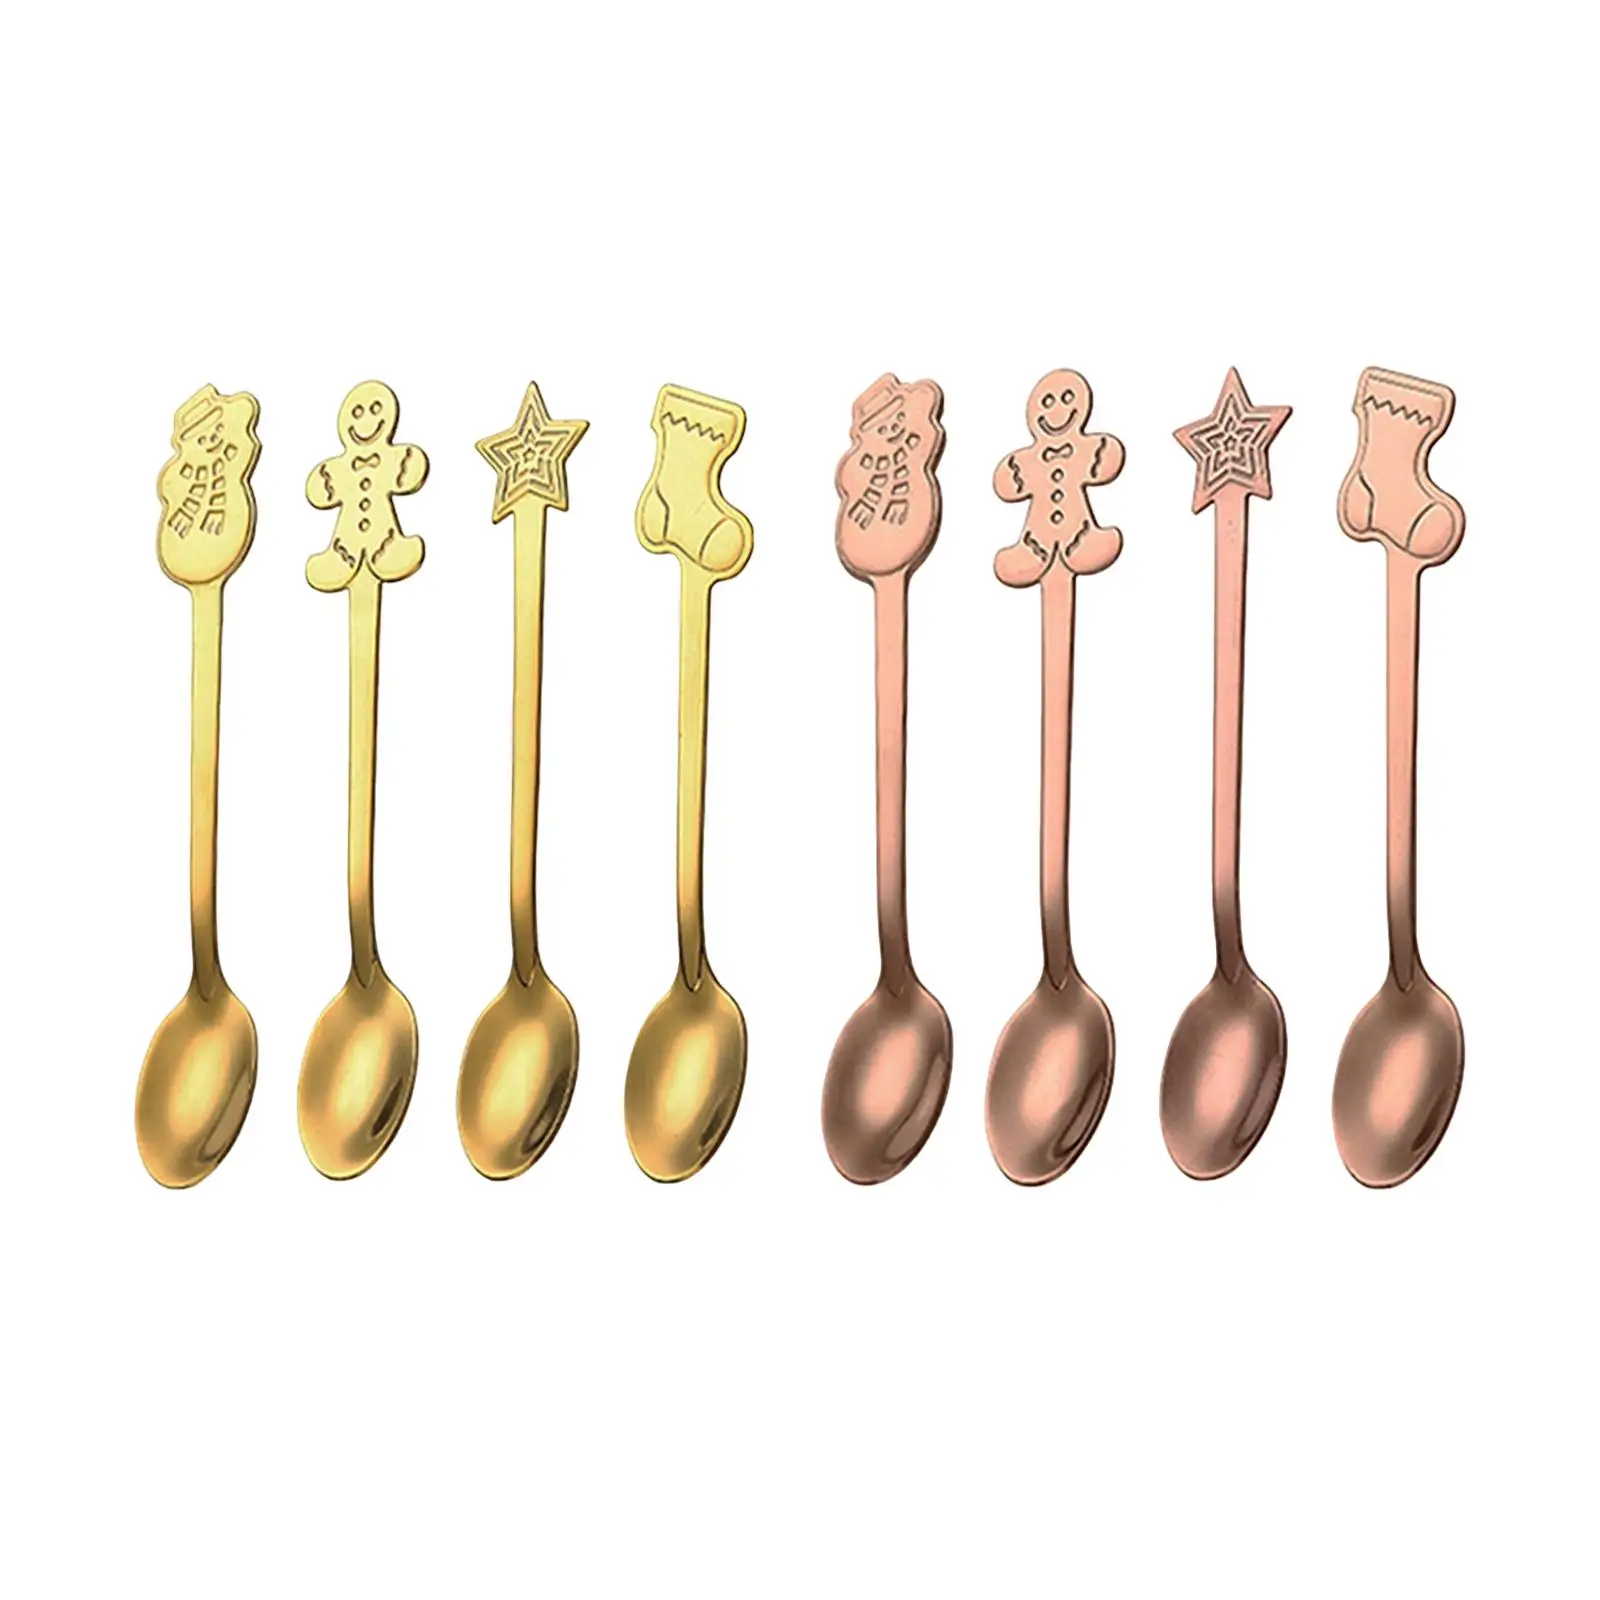 4 Pieces Christmas Coffee Spoons Espresso Spoons Kitchen Cutlery Small Spoons Kitchen for Hotel Wedding Cafe Cake Sugar